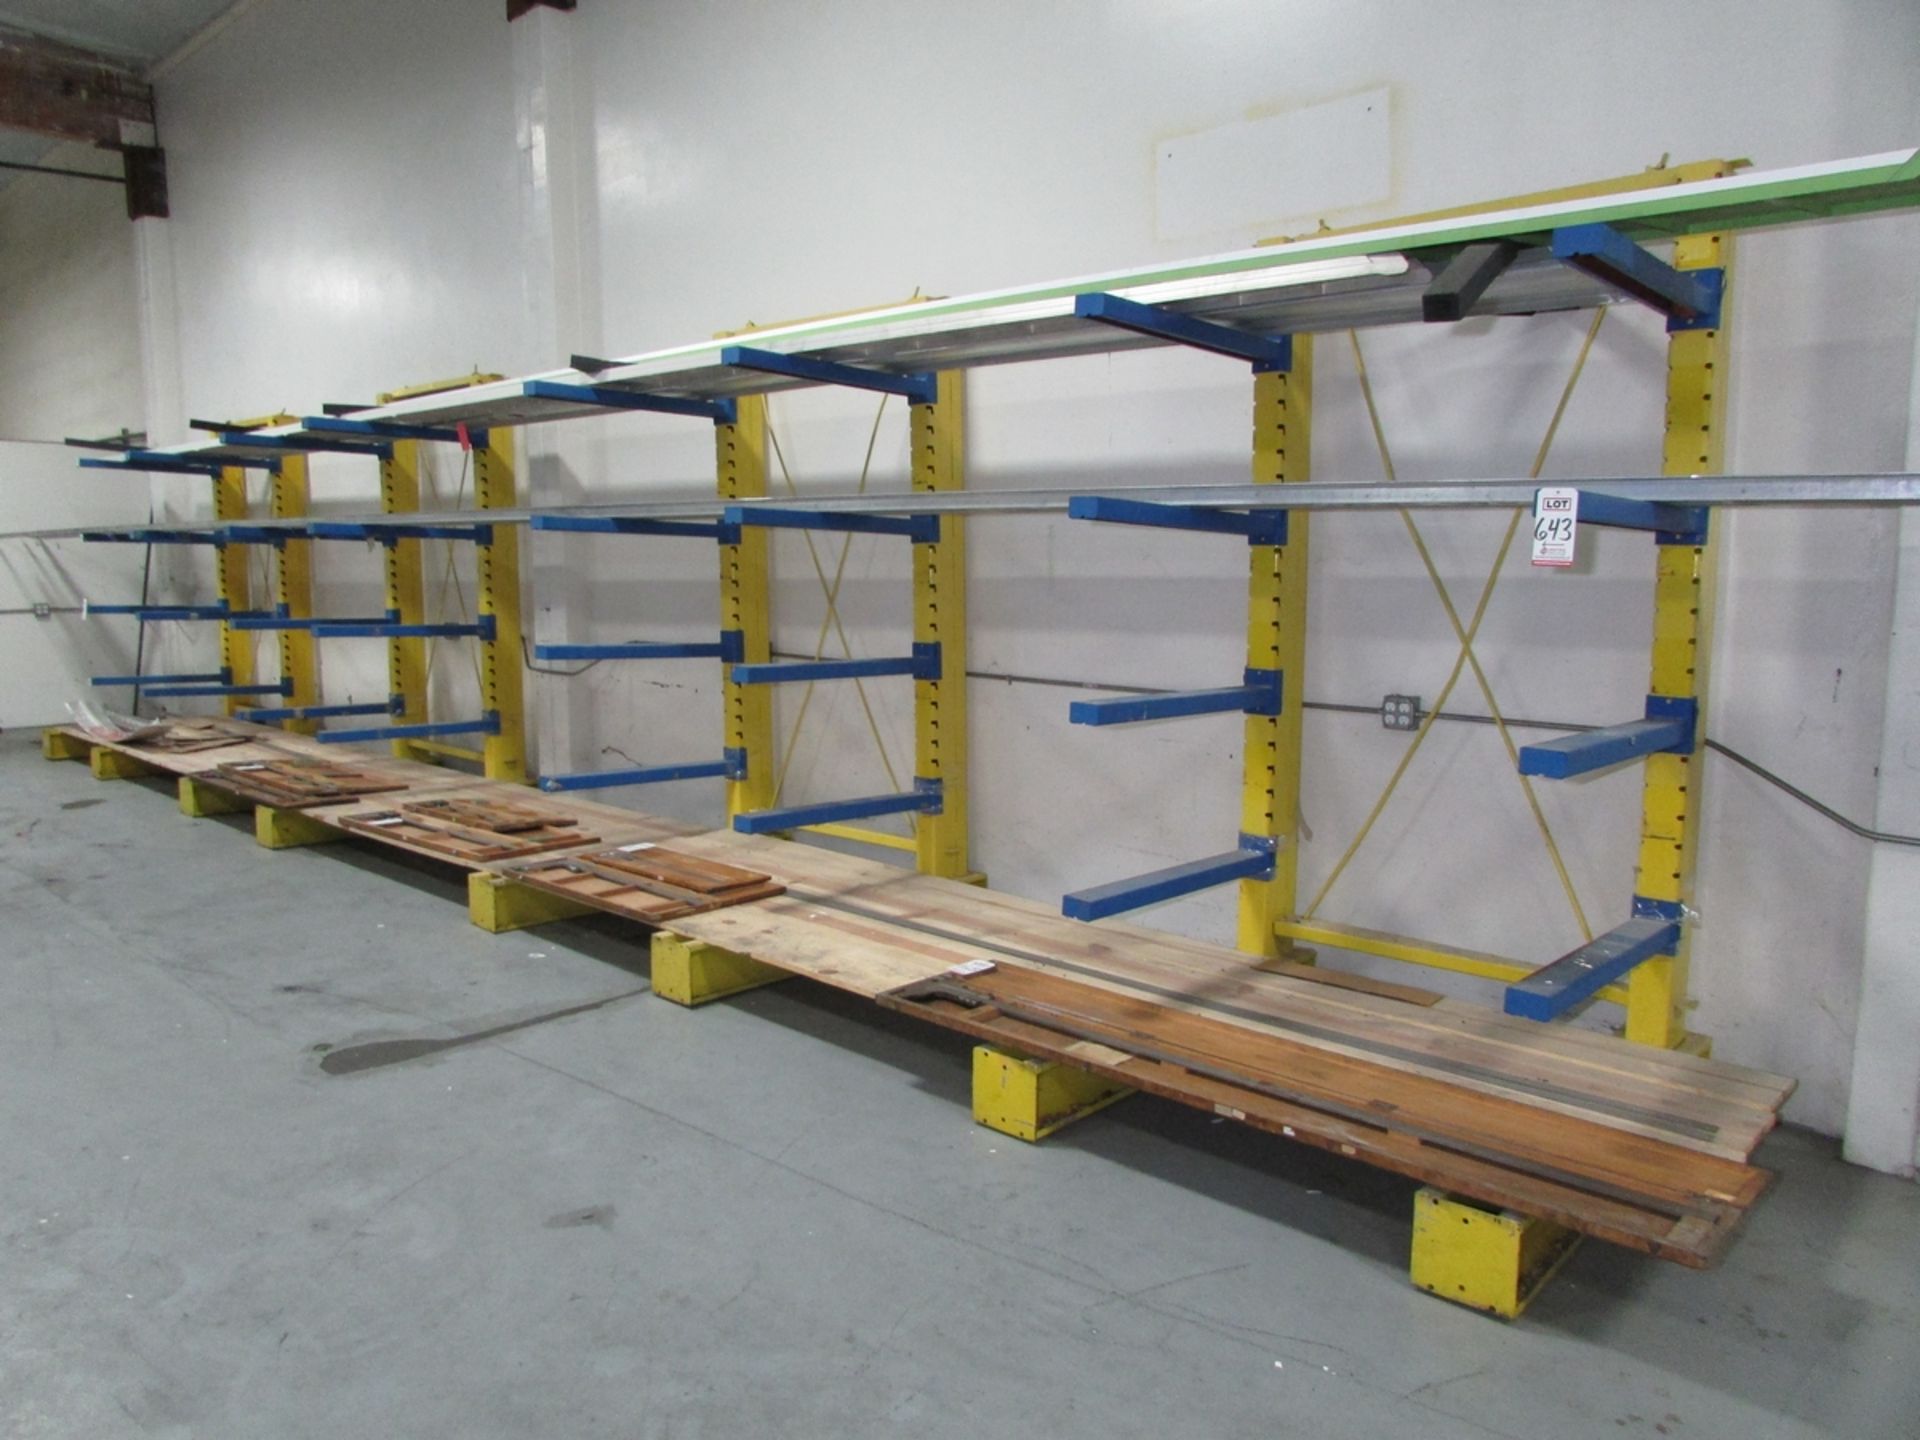 LOT - (4) SECTIONS OF ADJUSTABLE CANTILEVER RACKING, (8) 98" X 58" UPRIGHTS, 44" CROSSBEAMS, (32)